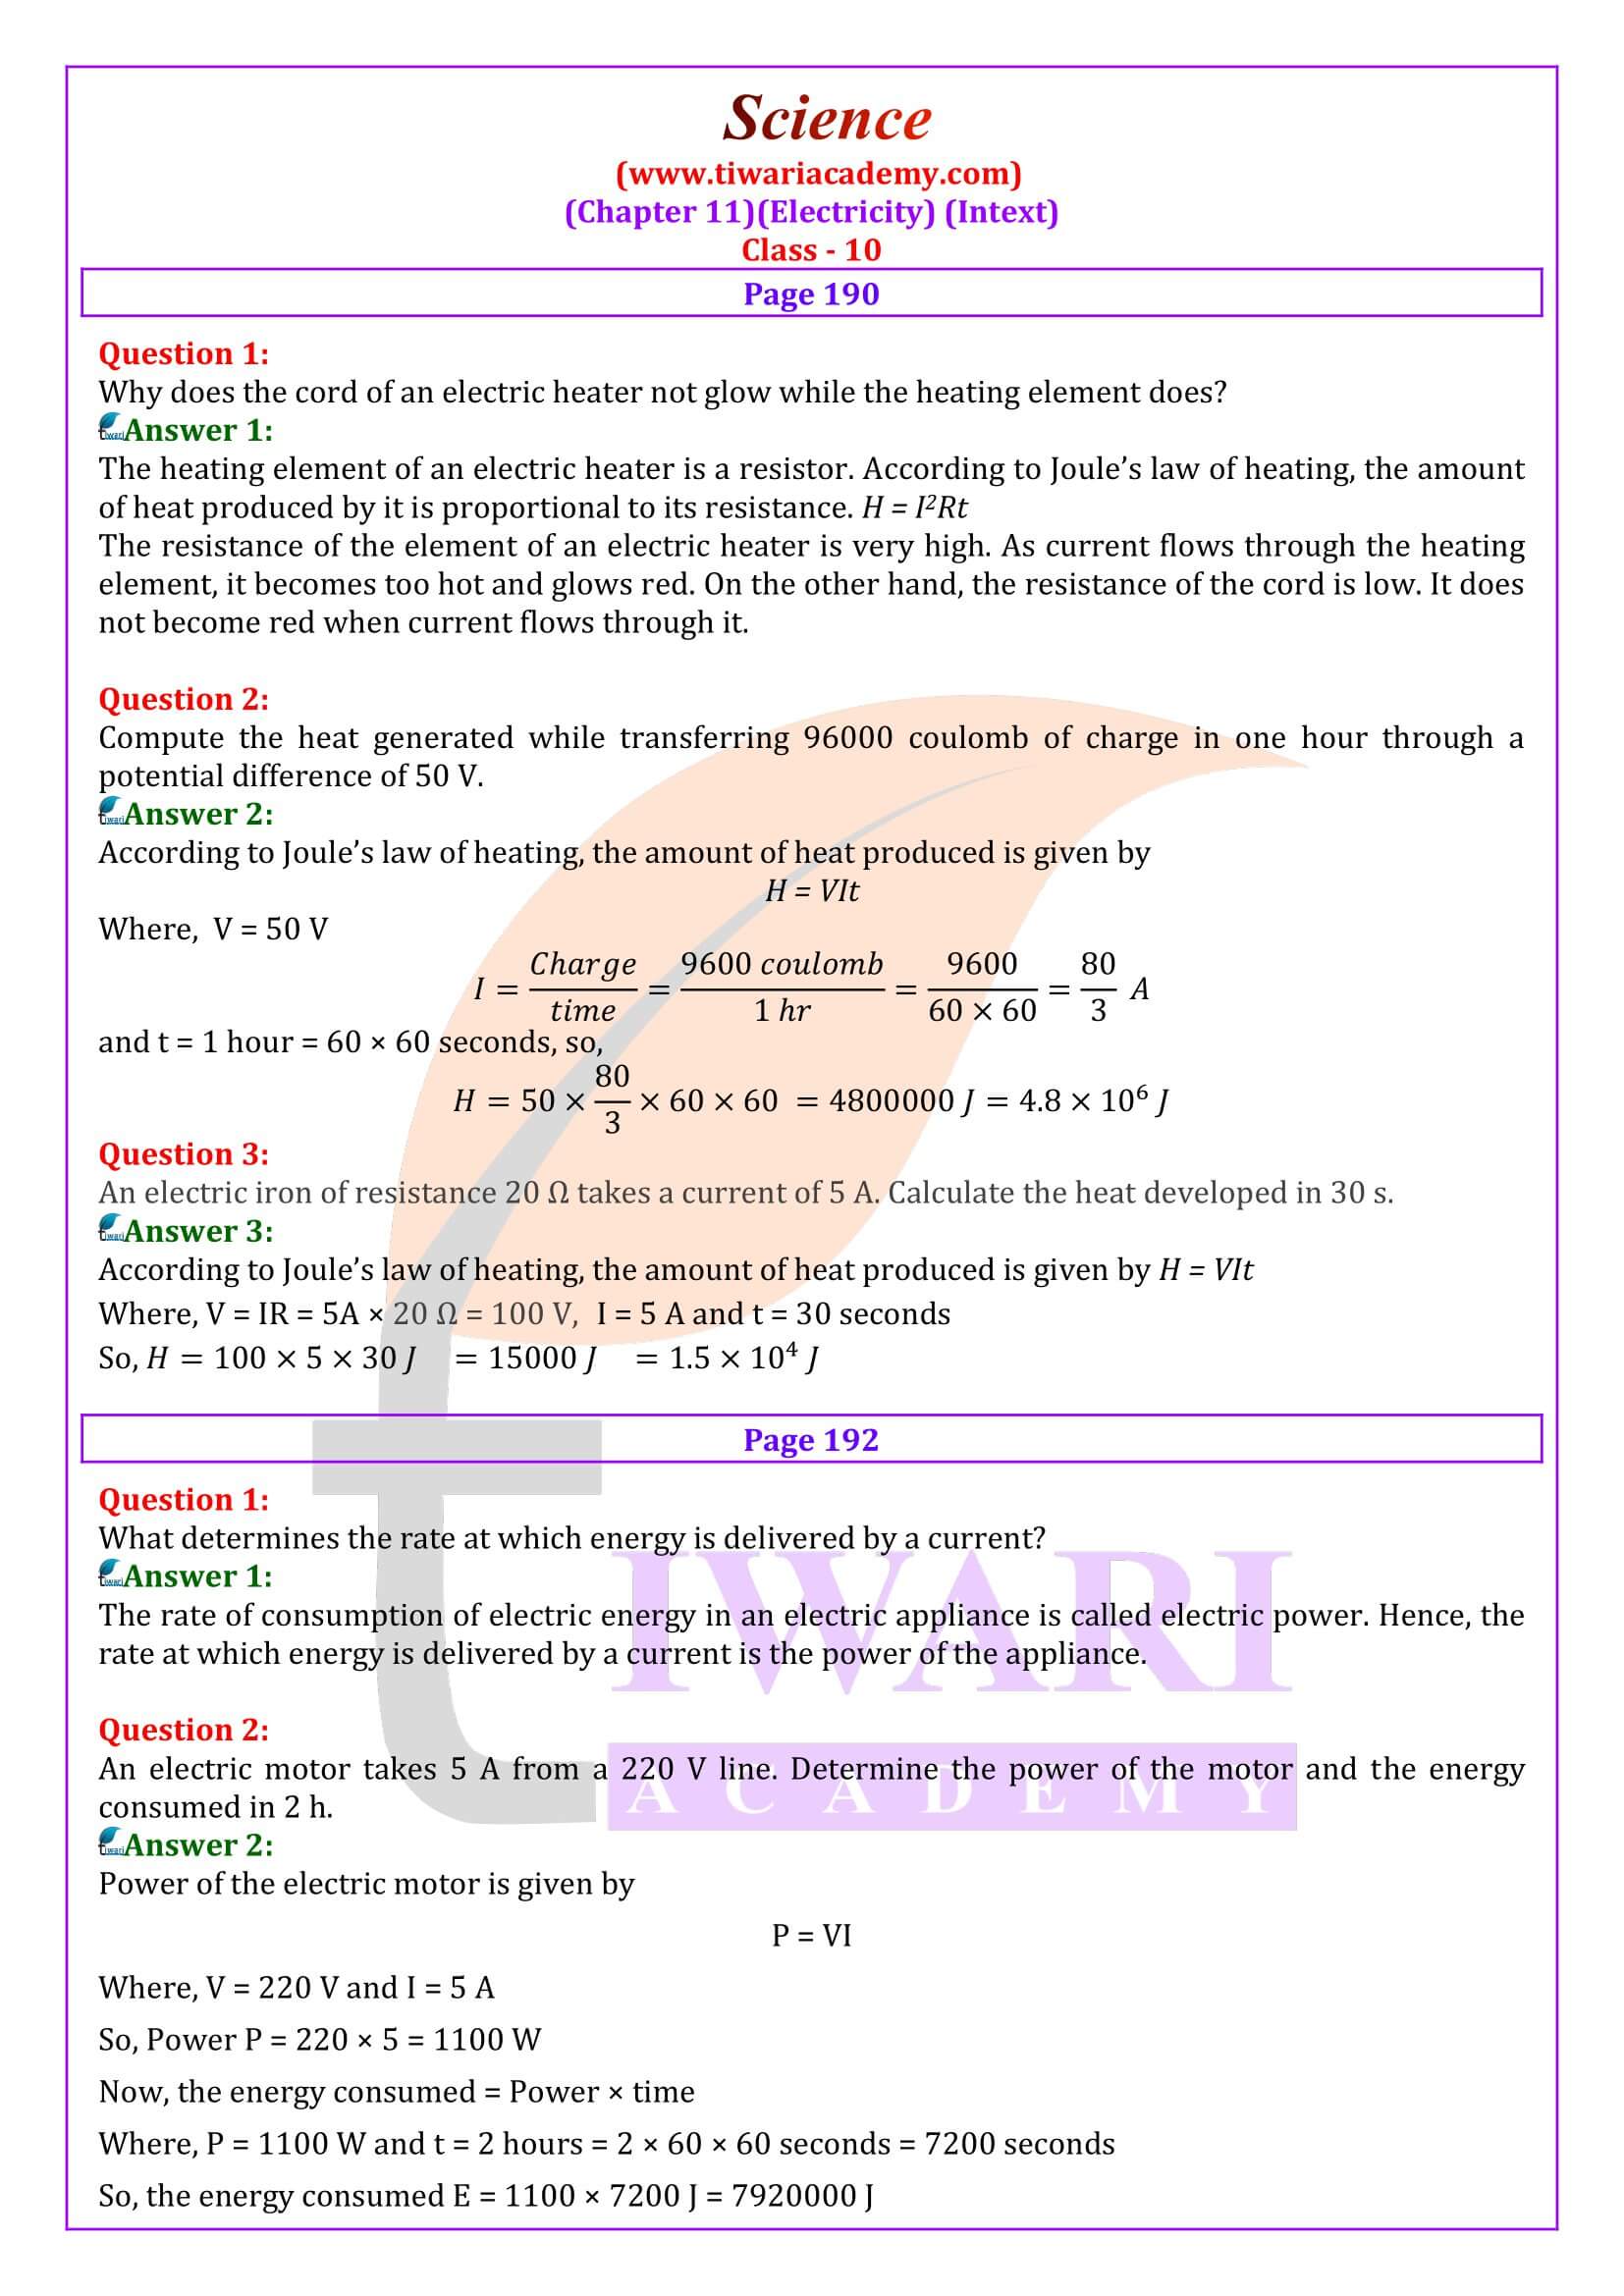 Class 10 Science Chapter 11 intext question answers